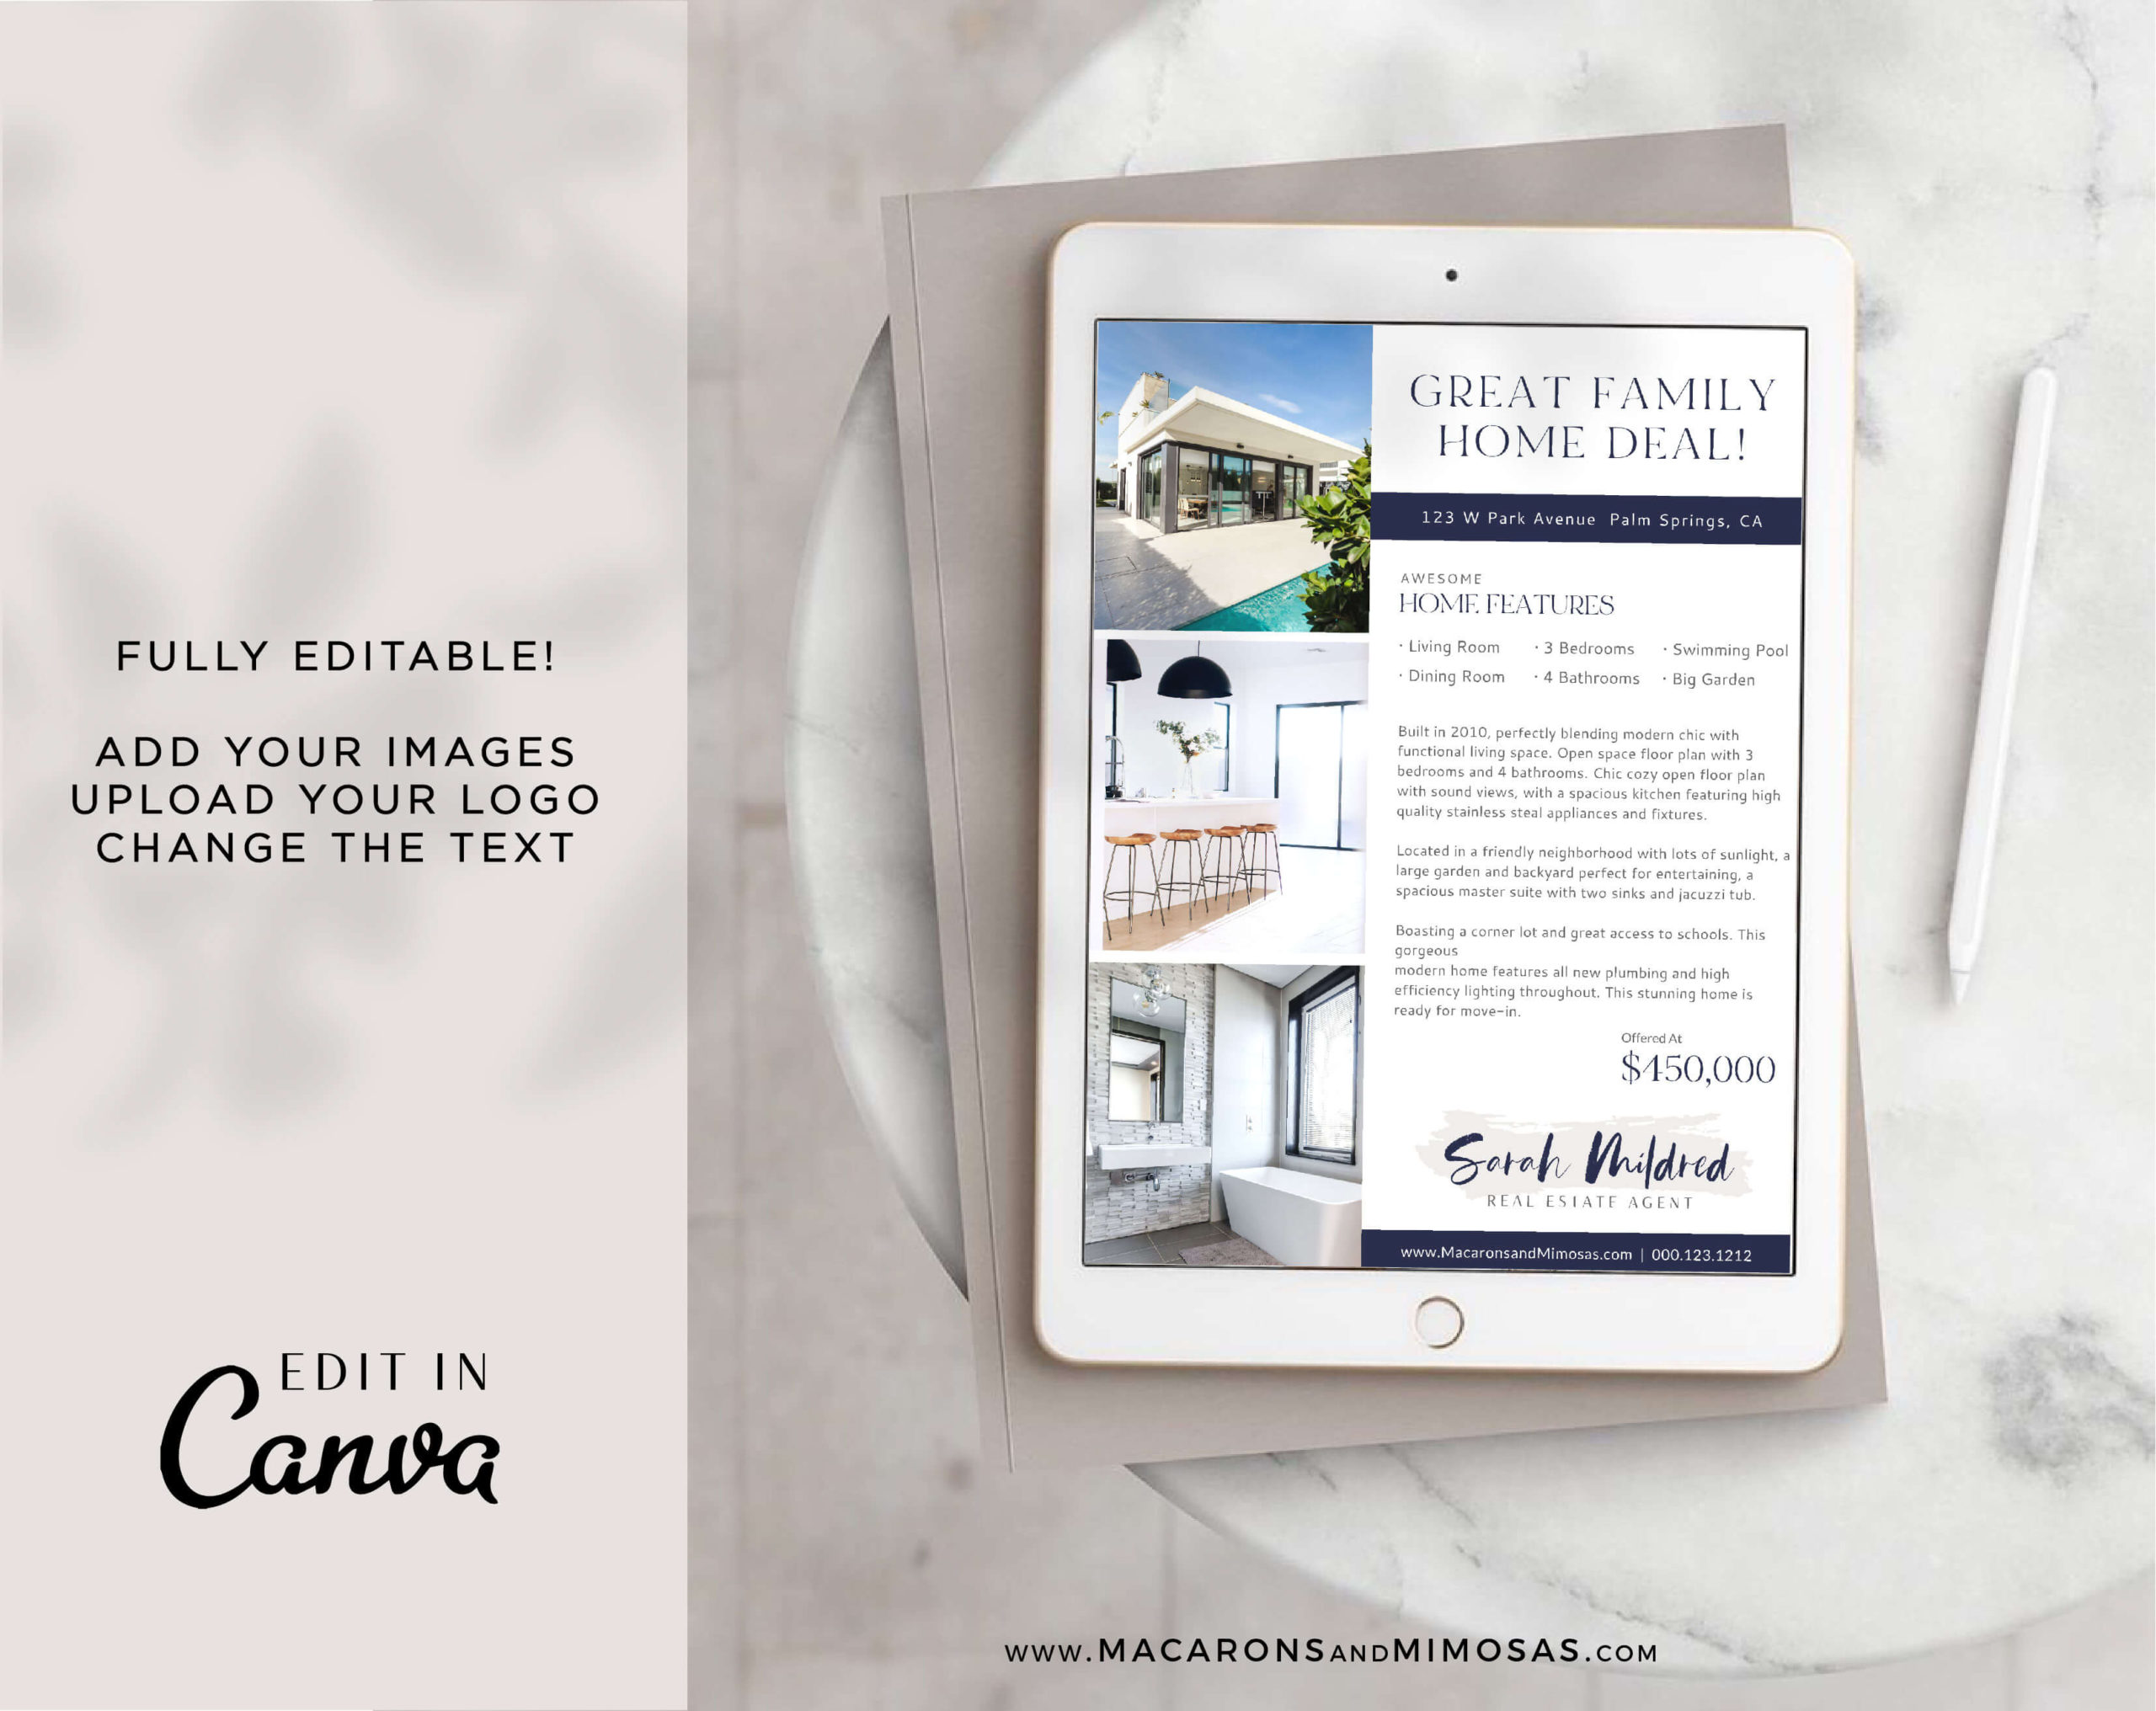 Real Estate Open House Flyer Template, Just Listed Home Flyer Sheet, Canva Marketing New House Listing Design, House for Sale